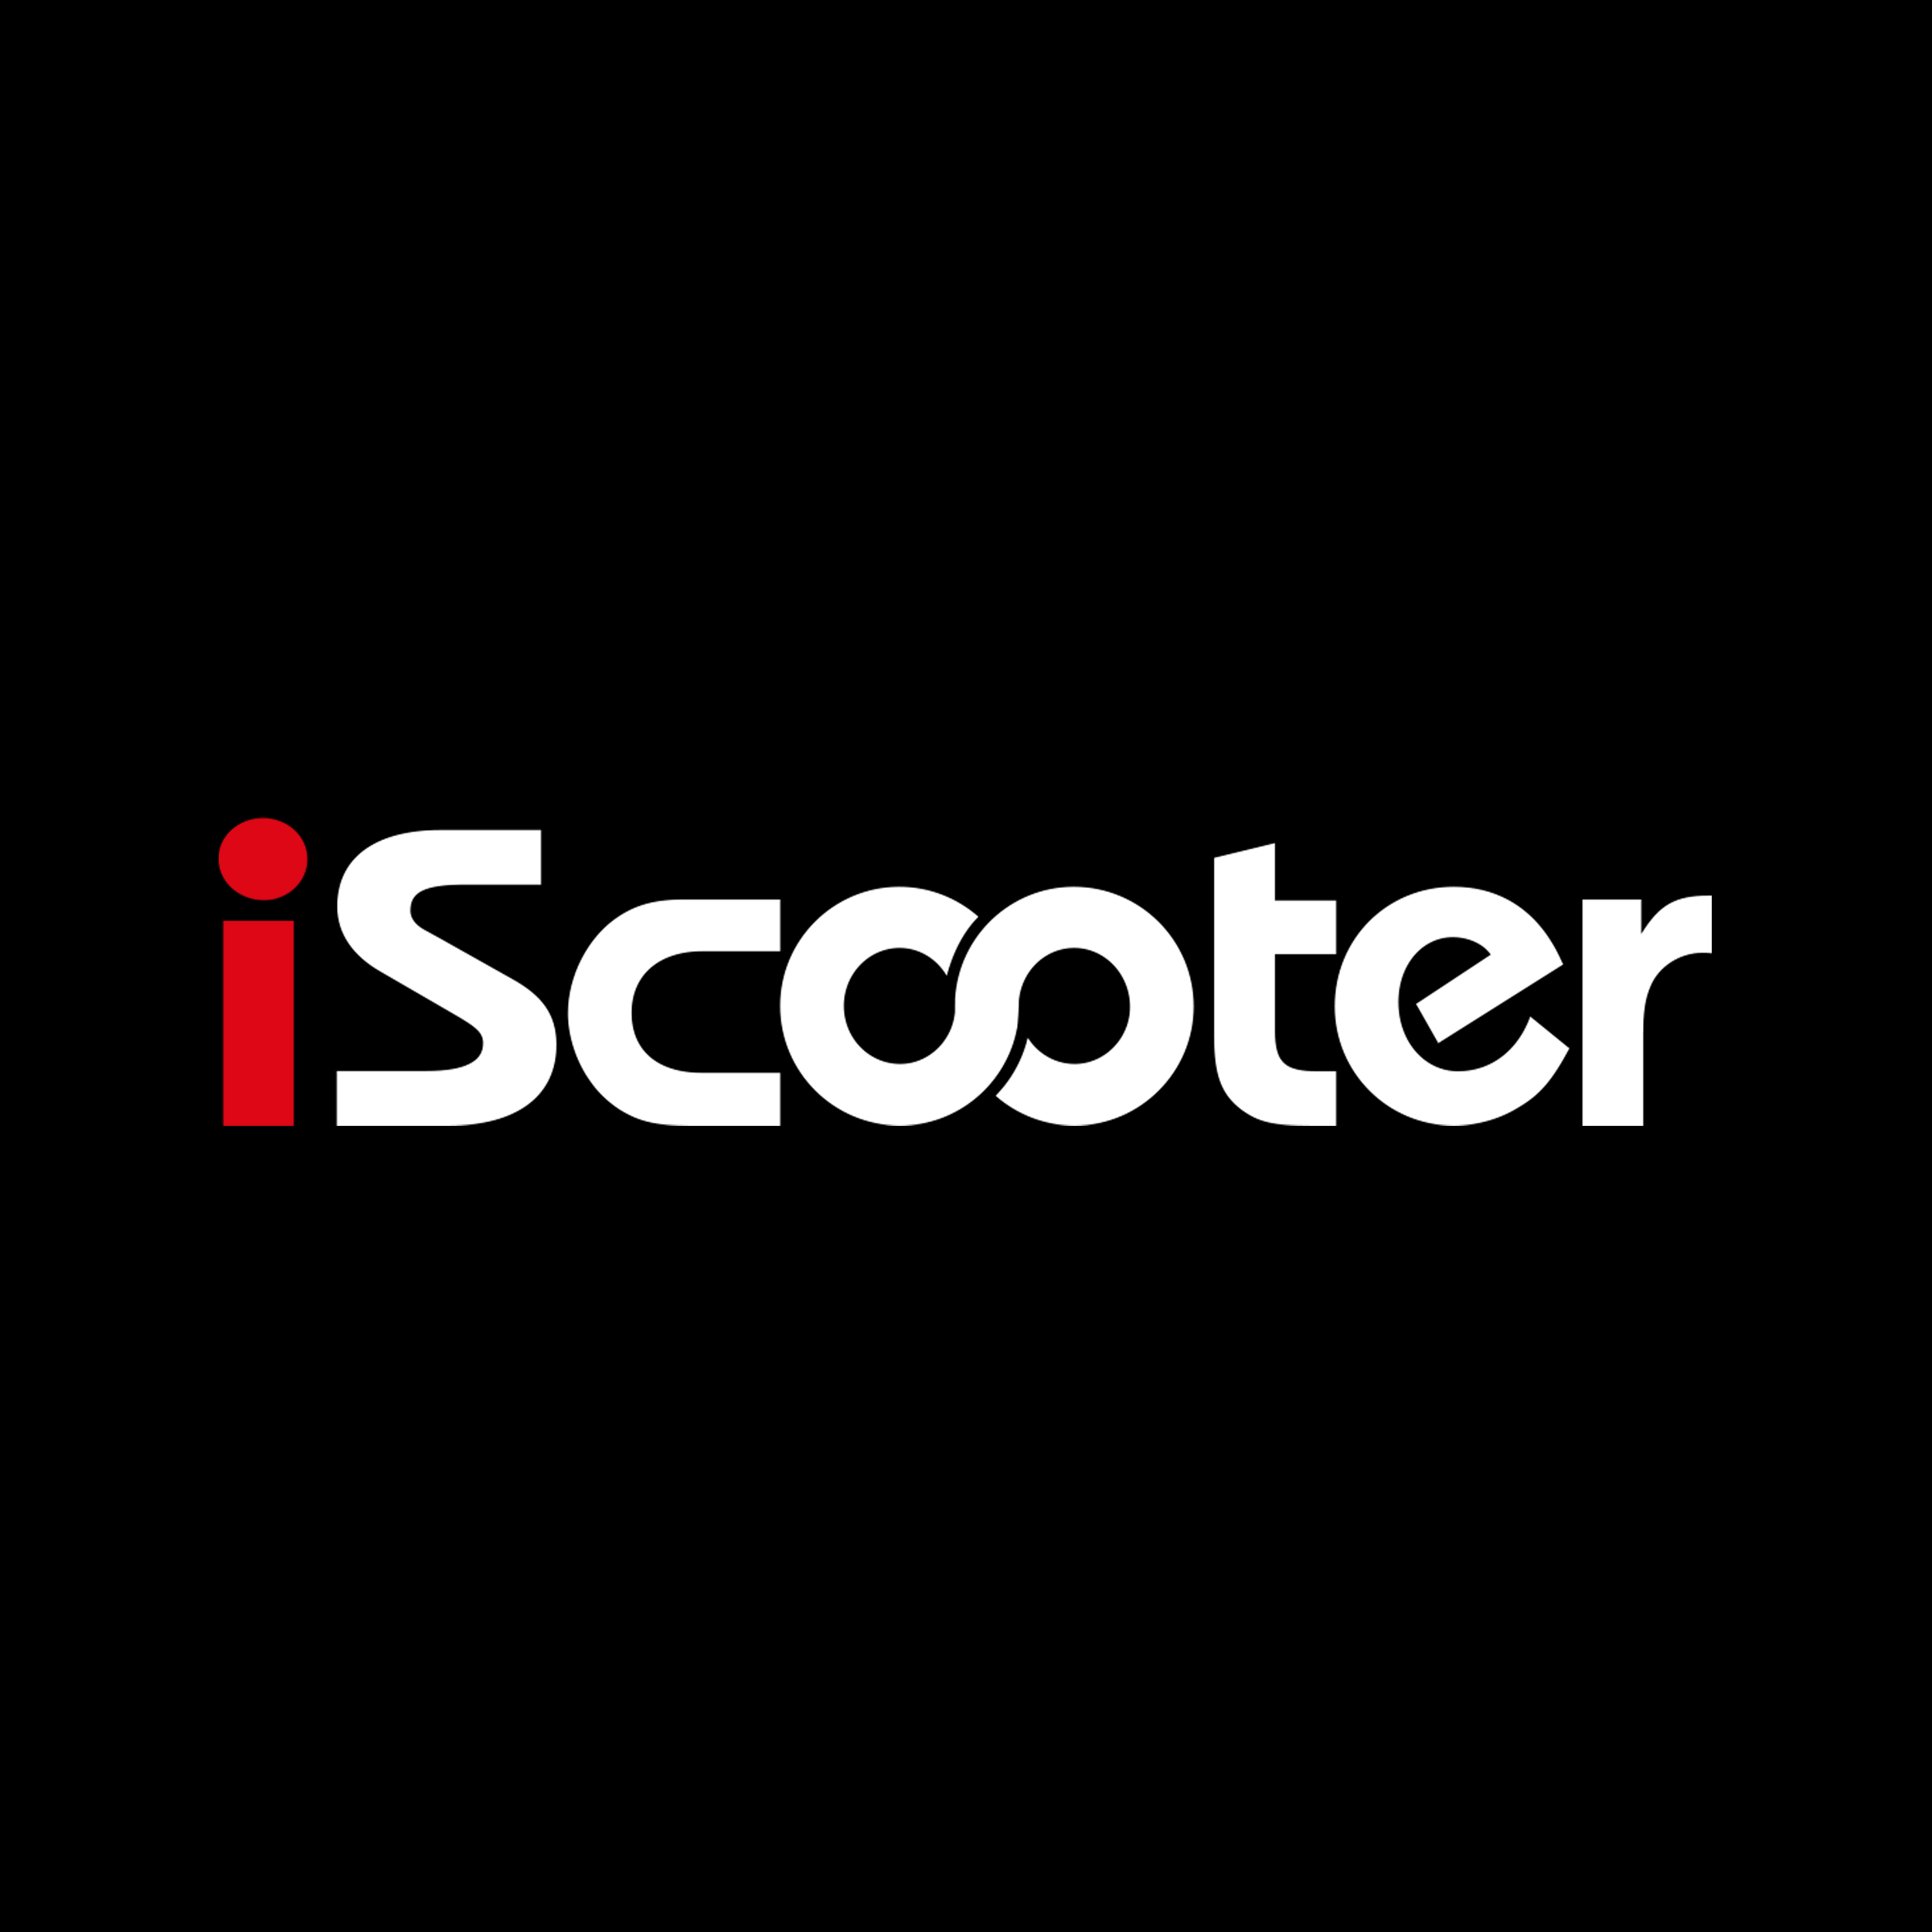 iScooter Coupons & Promo Codes